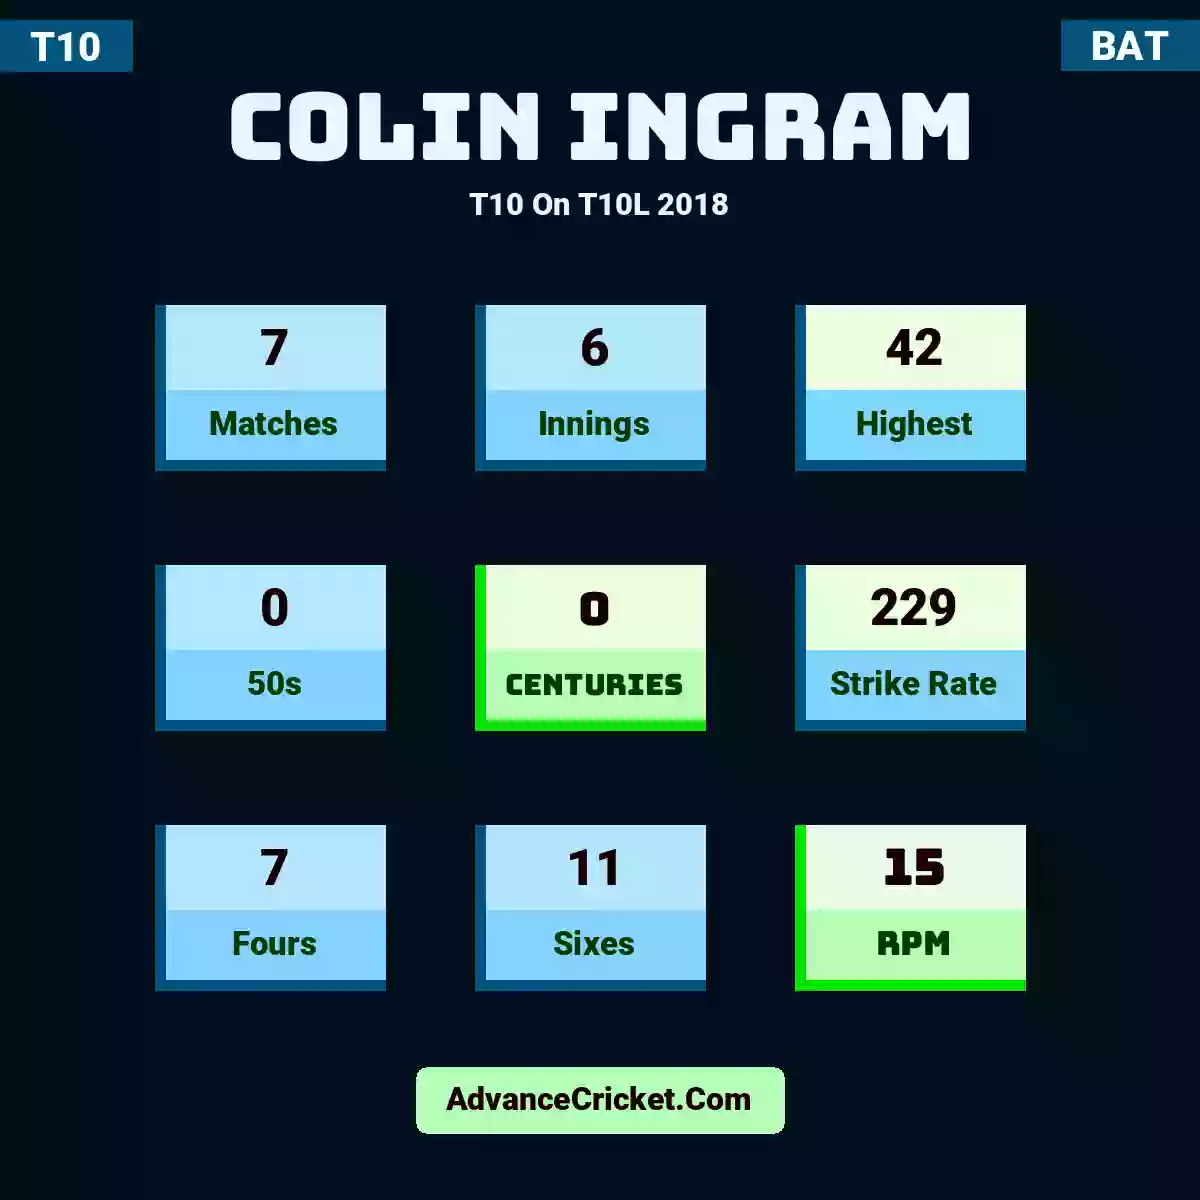 Colin Ingram T10  On T10L 2018, Colin Ingram played 7 matches, scored 42 runs as highest, 0 half-centuries, and 0 centuries, with a strike rate of 229. C.Ingram hit 7 fours and 11 sixes, with an RPM of 15.